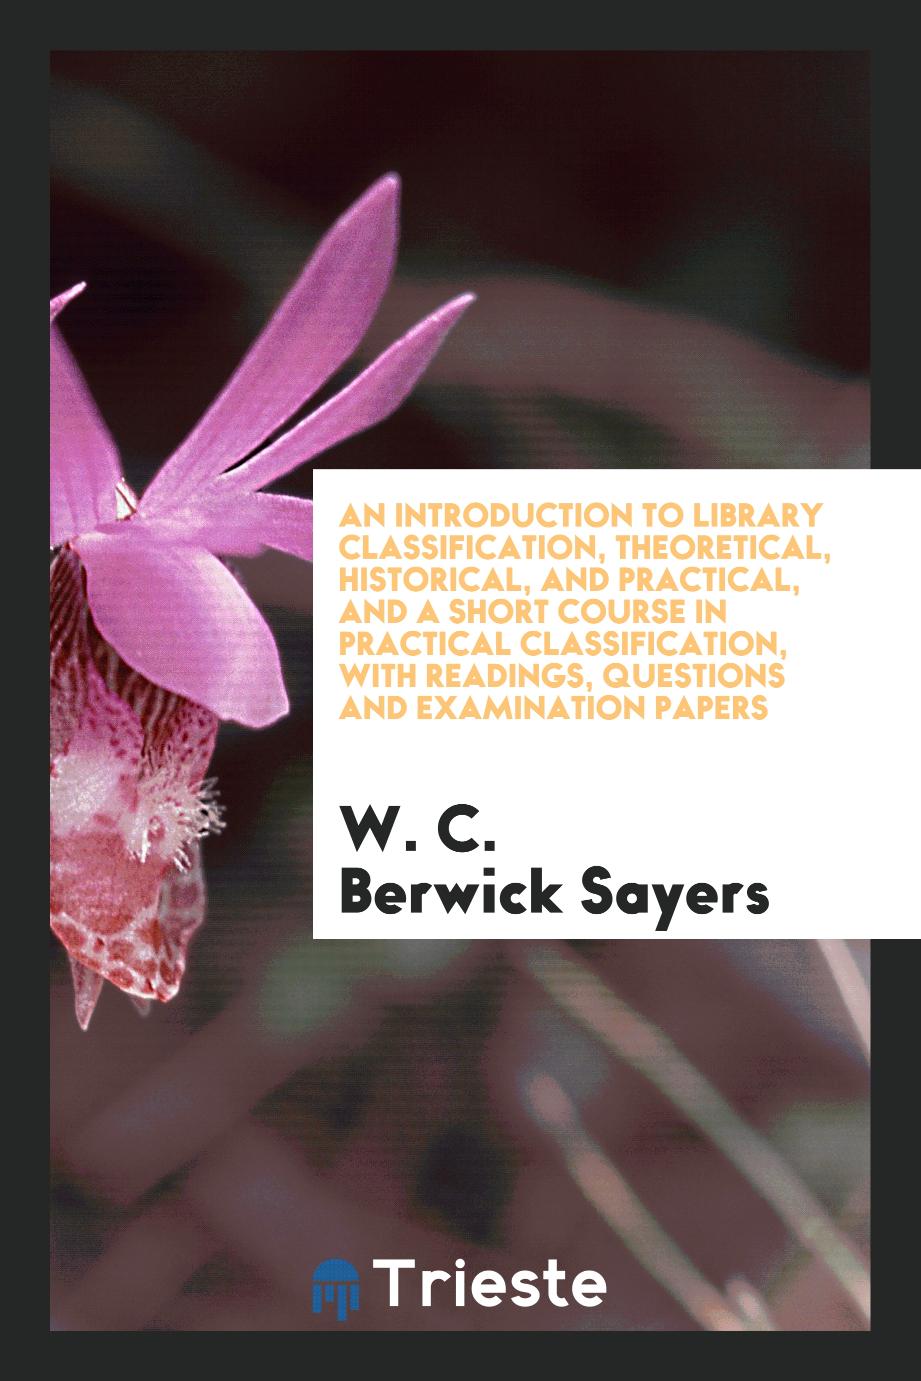 An introduction to library classification, theoretical, historical, and practical, and a short course in practical classification, with readings, questions and examination papers